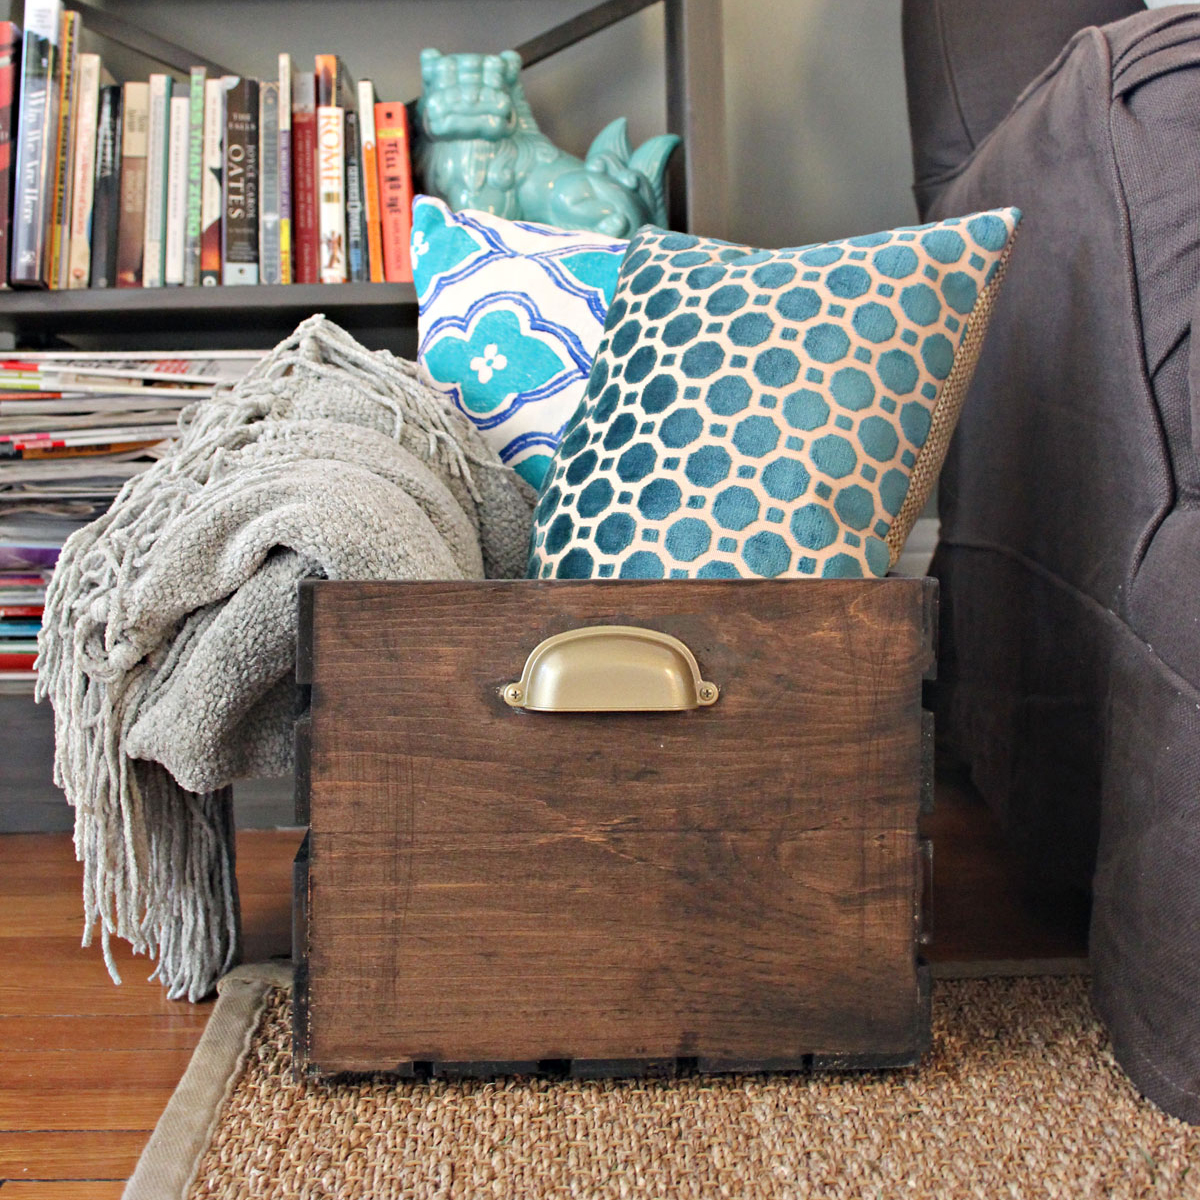 Customize a DIY Wooden Storage Crate